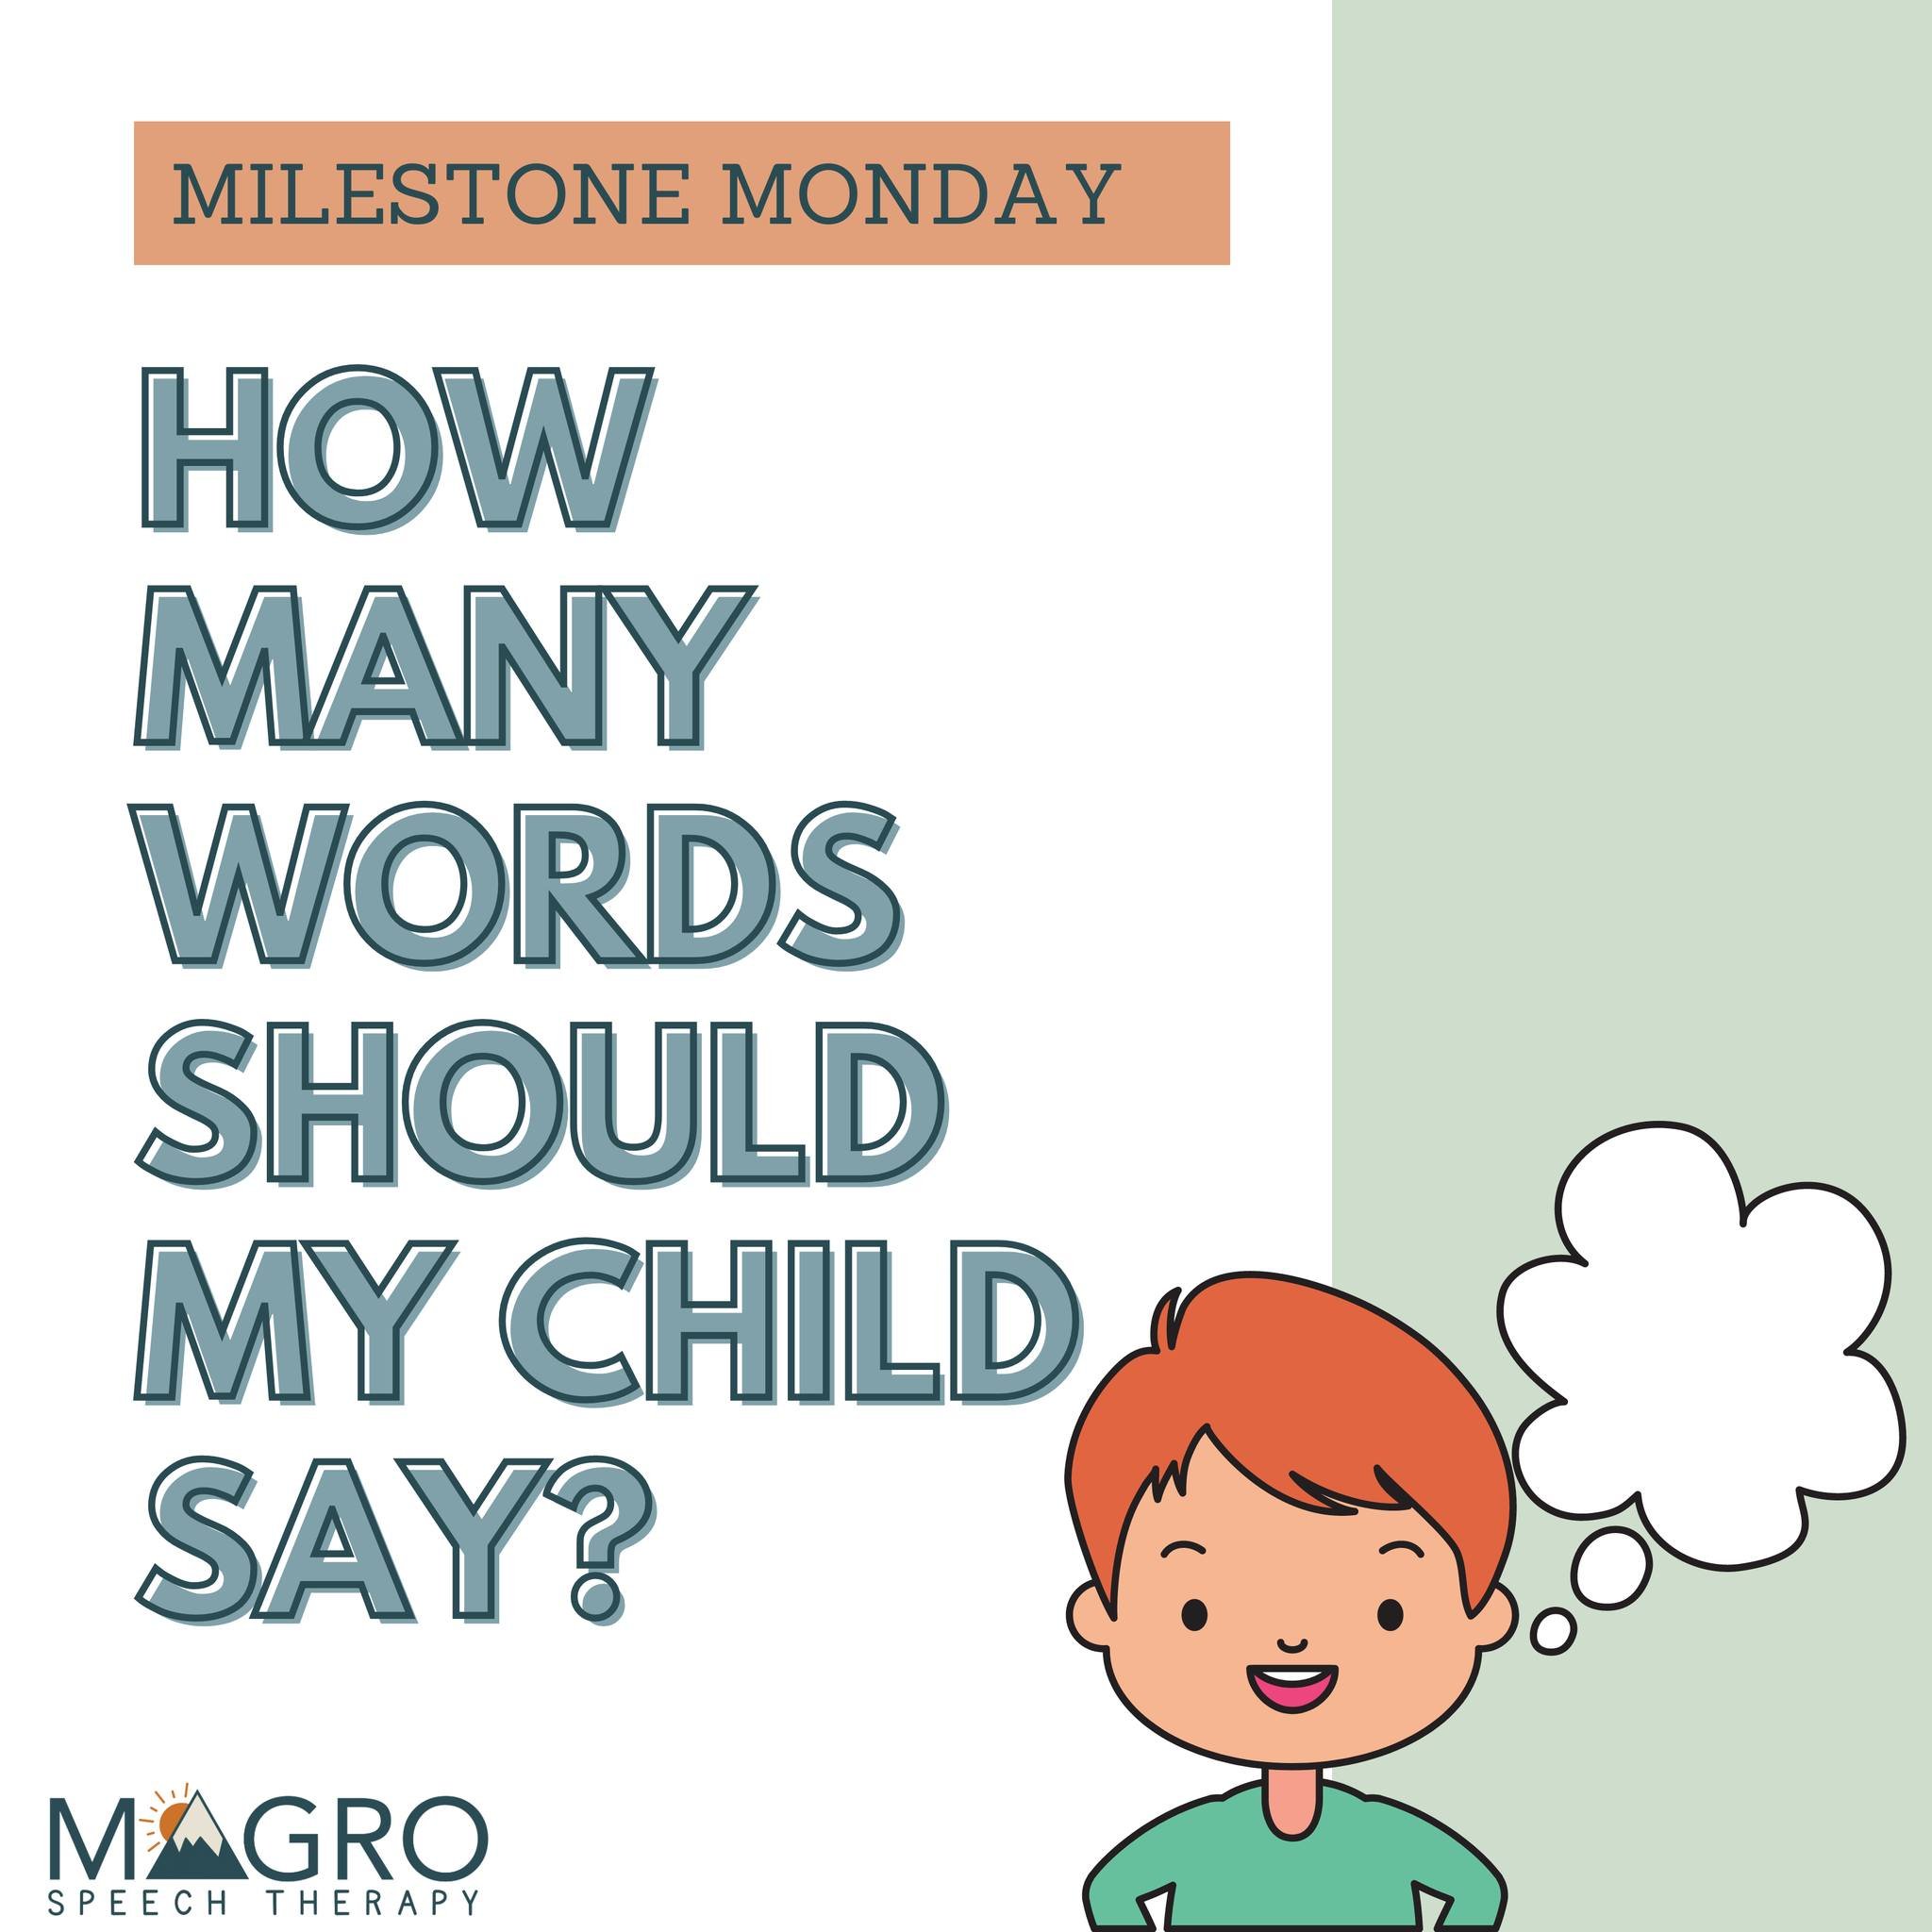 Tracking milestones might be one of the most stressful parts of parenthood (IMO). Use this quick, simple guide to understand how many words your child should say and when!
Not sure if your child is on track? Concerned or curious about development? Al